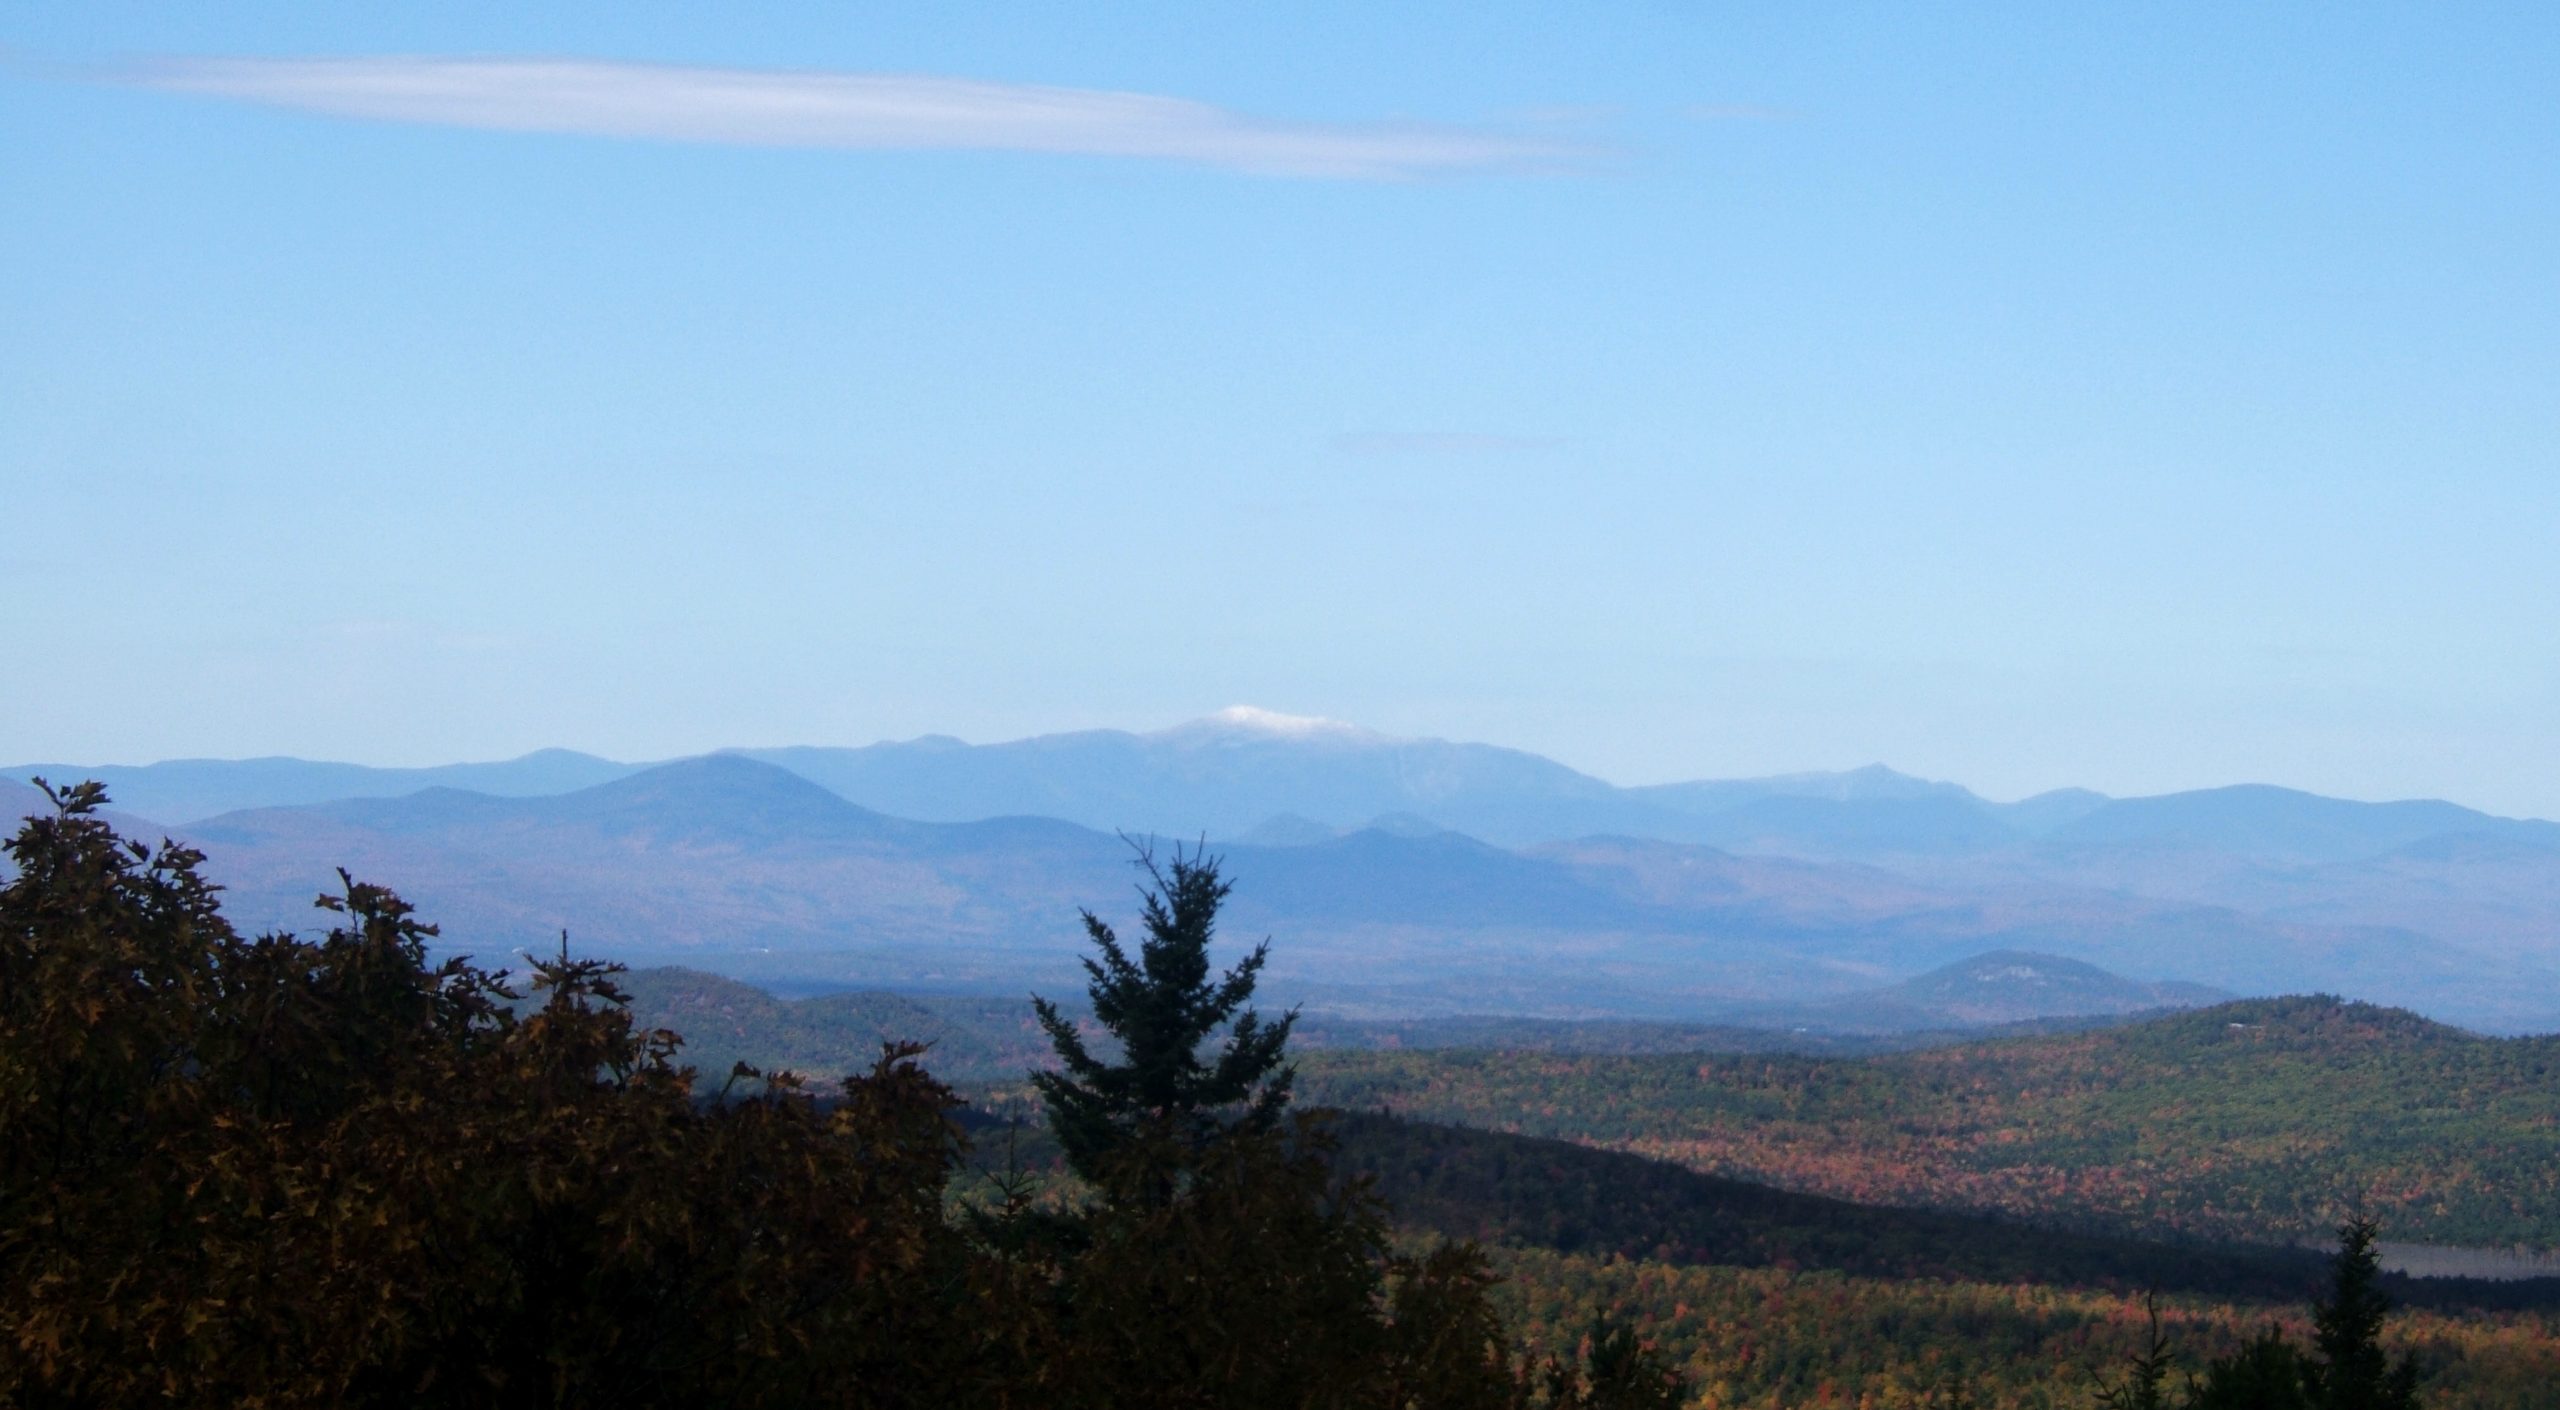 Snow On The Mount As Seen From Maine (user submitted)